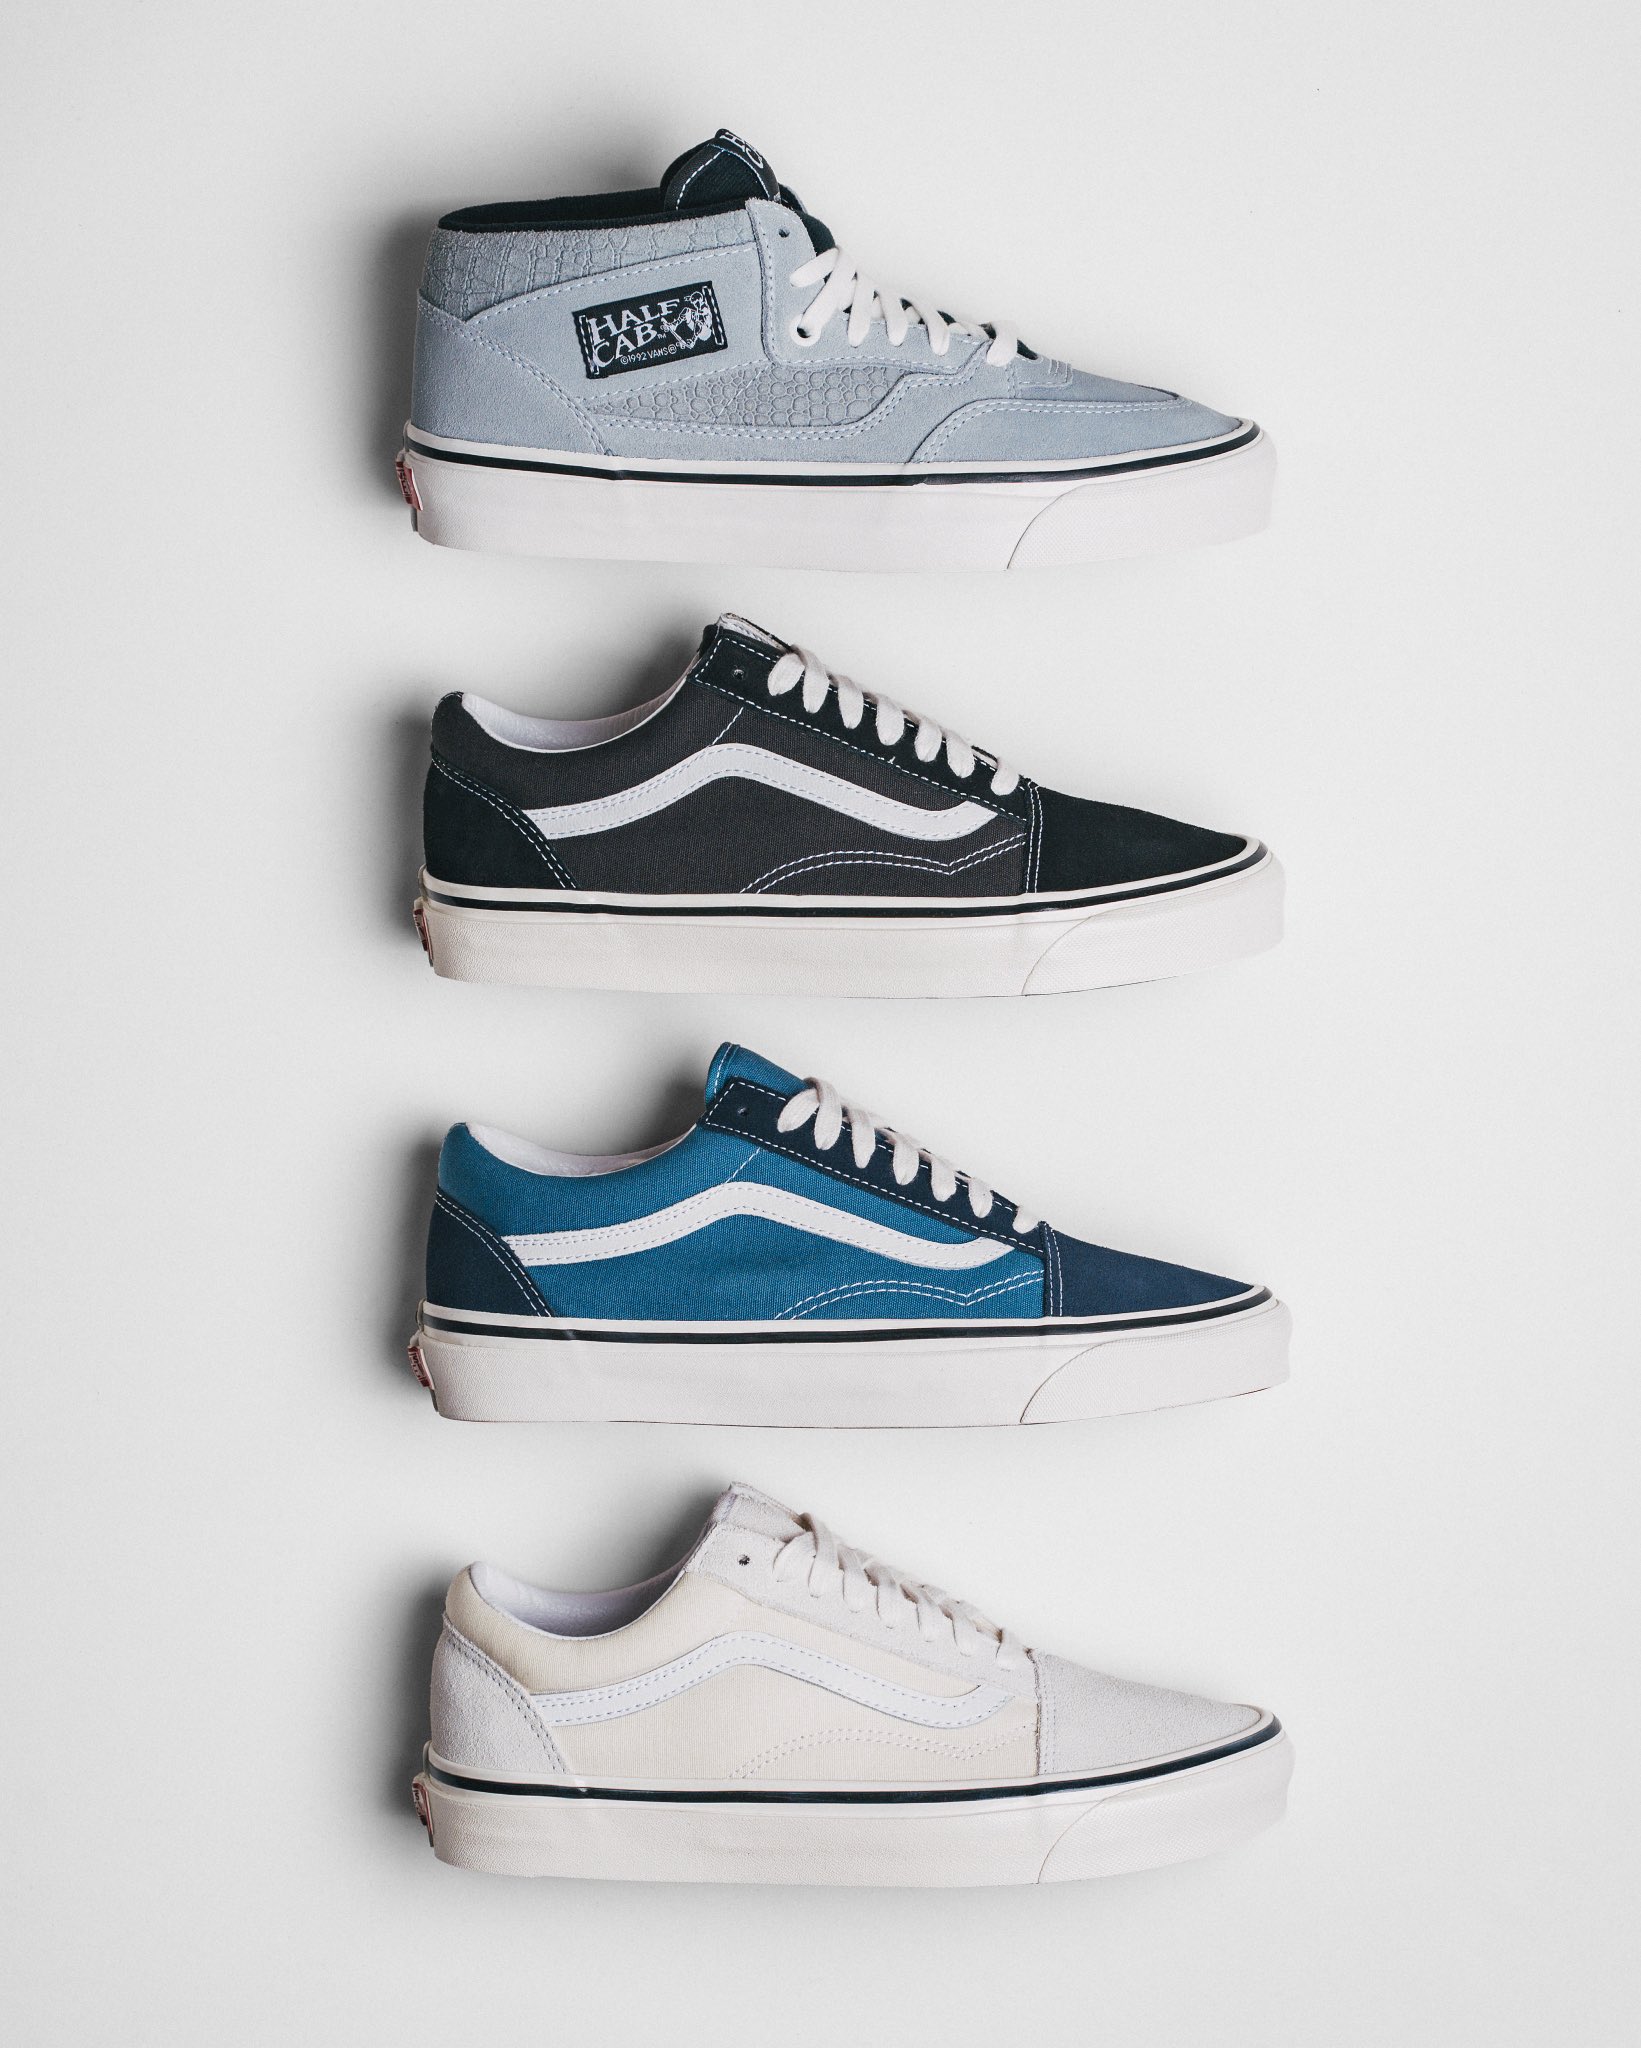 Packer on Twitter: arrivals from the Vans Anaheim Factory collection the Old Skool 36 DX &amp; Half Cab 33 • Shop each pair available online and in store at